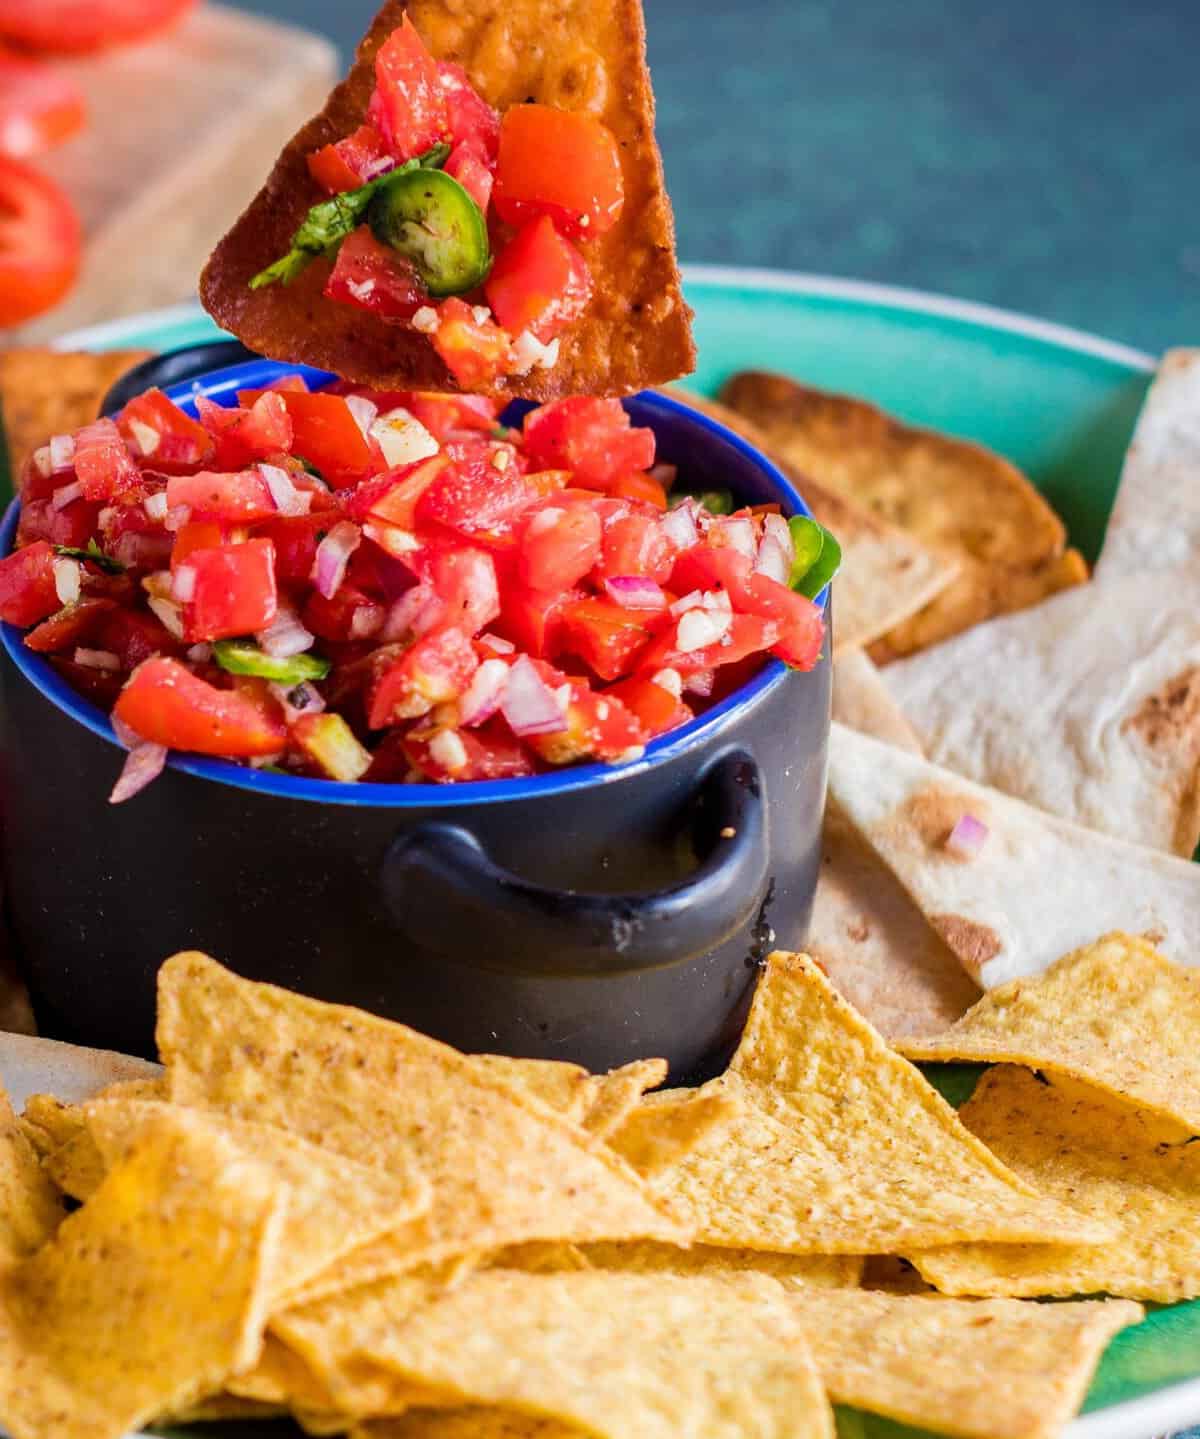  A party without salsa is just a meeting!